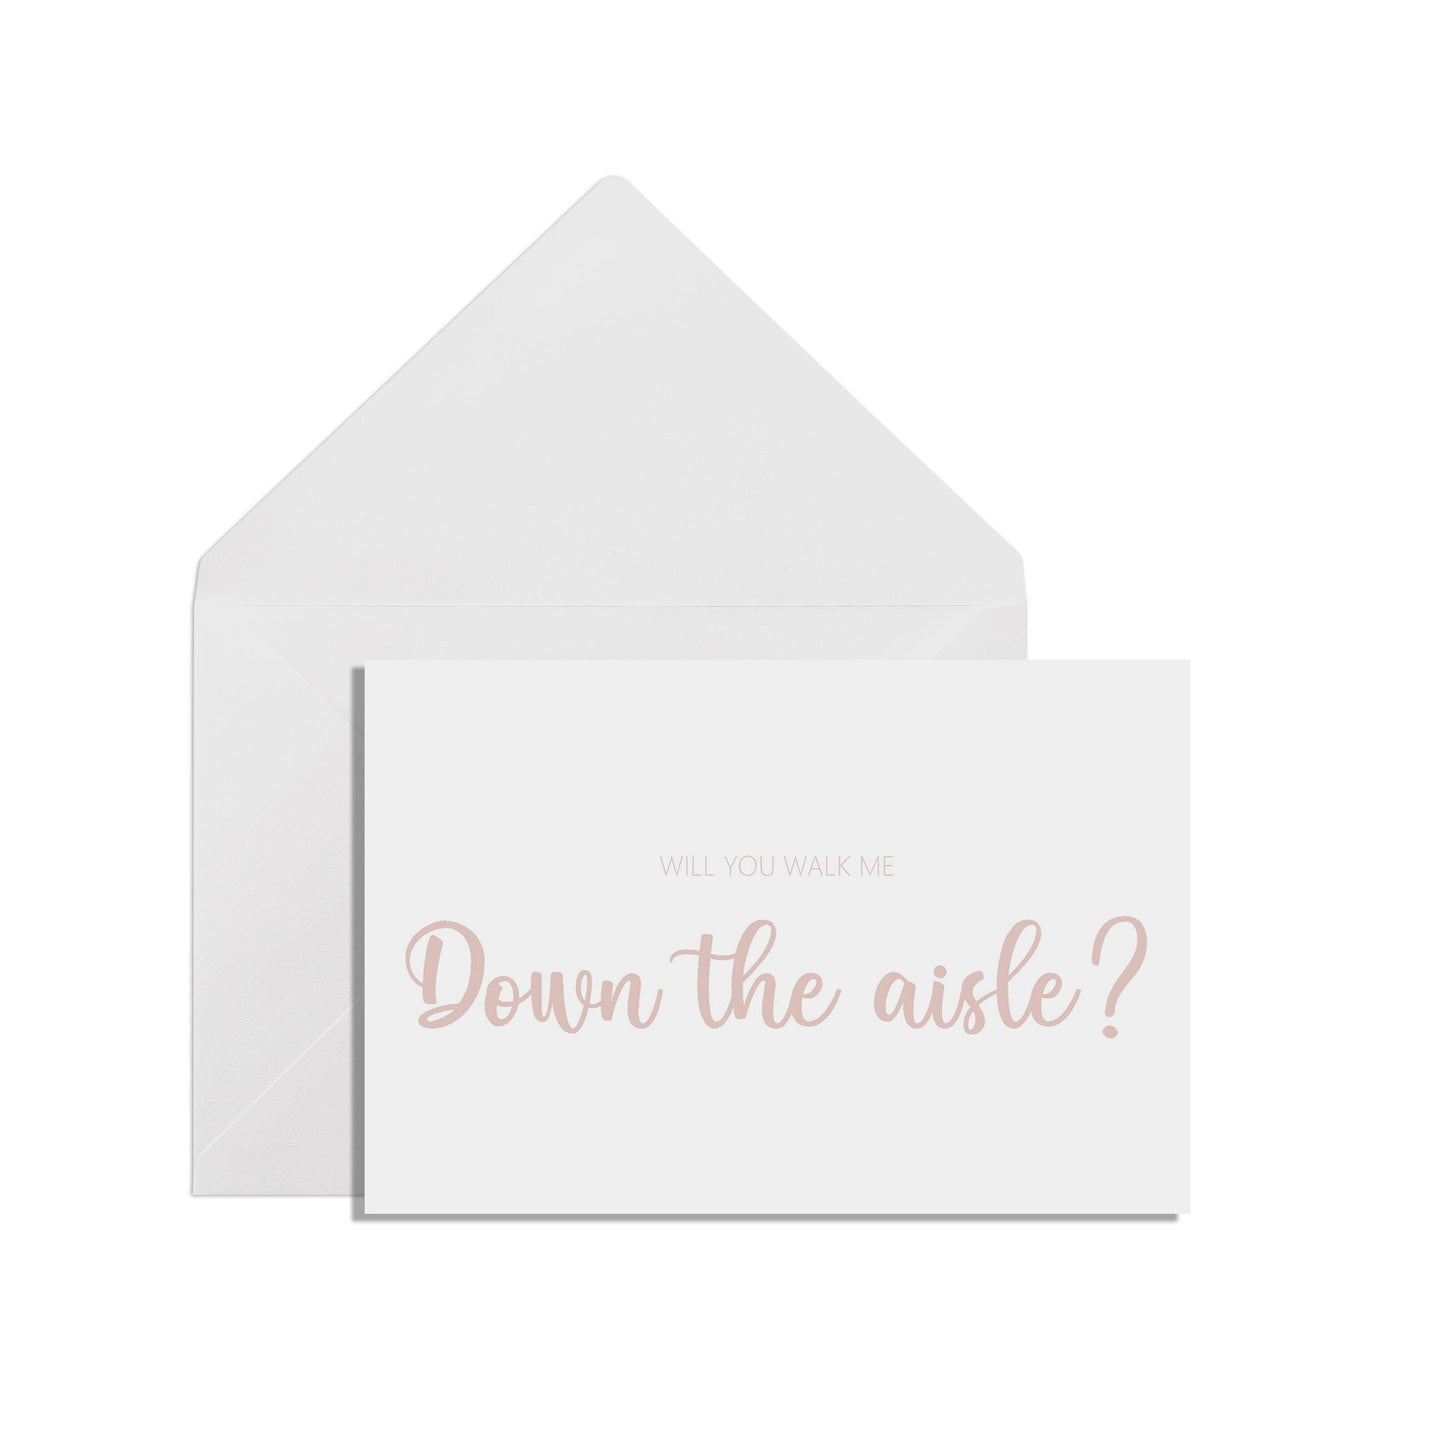 Will You Walk Me Down The Aisle? A6 Rose Gold Effect Proposal Card With White Envelope